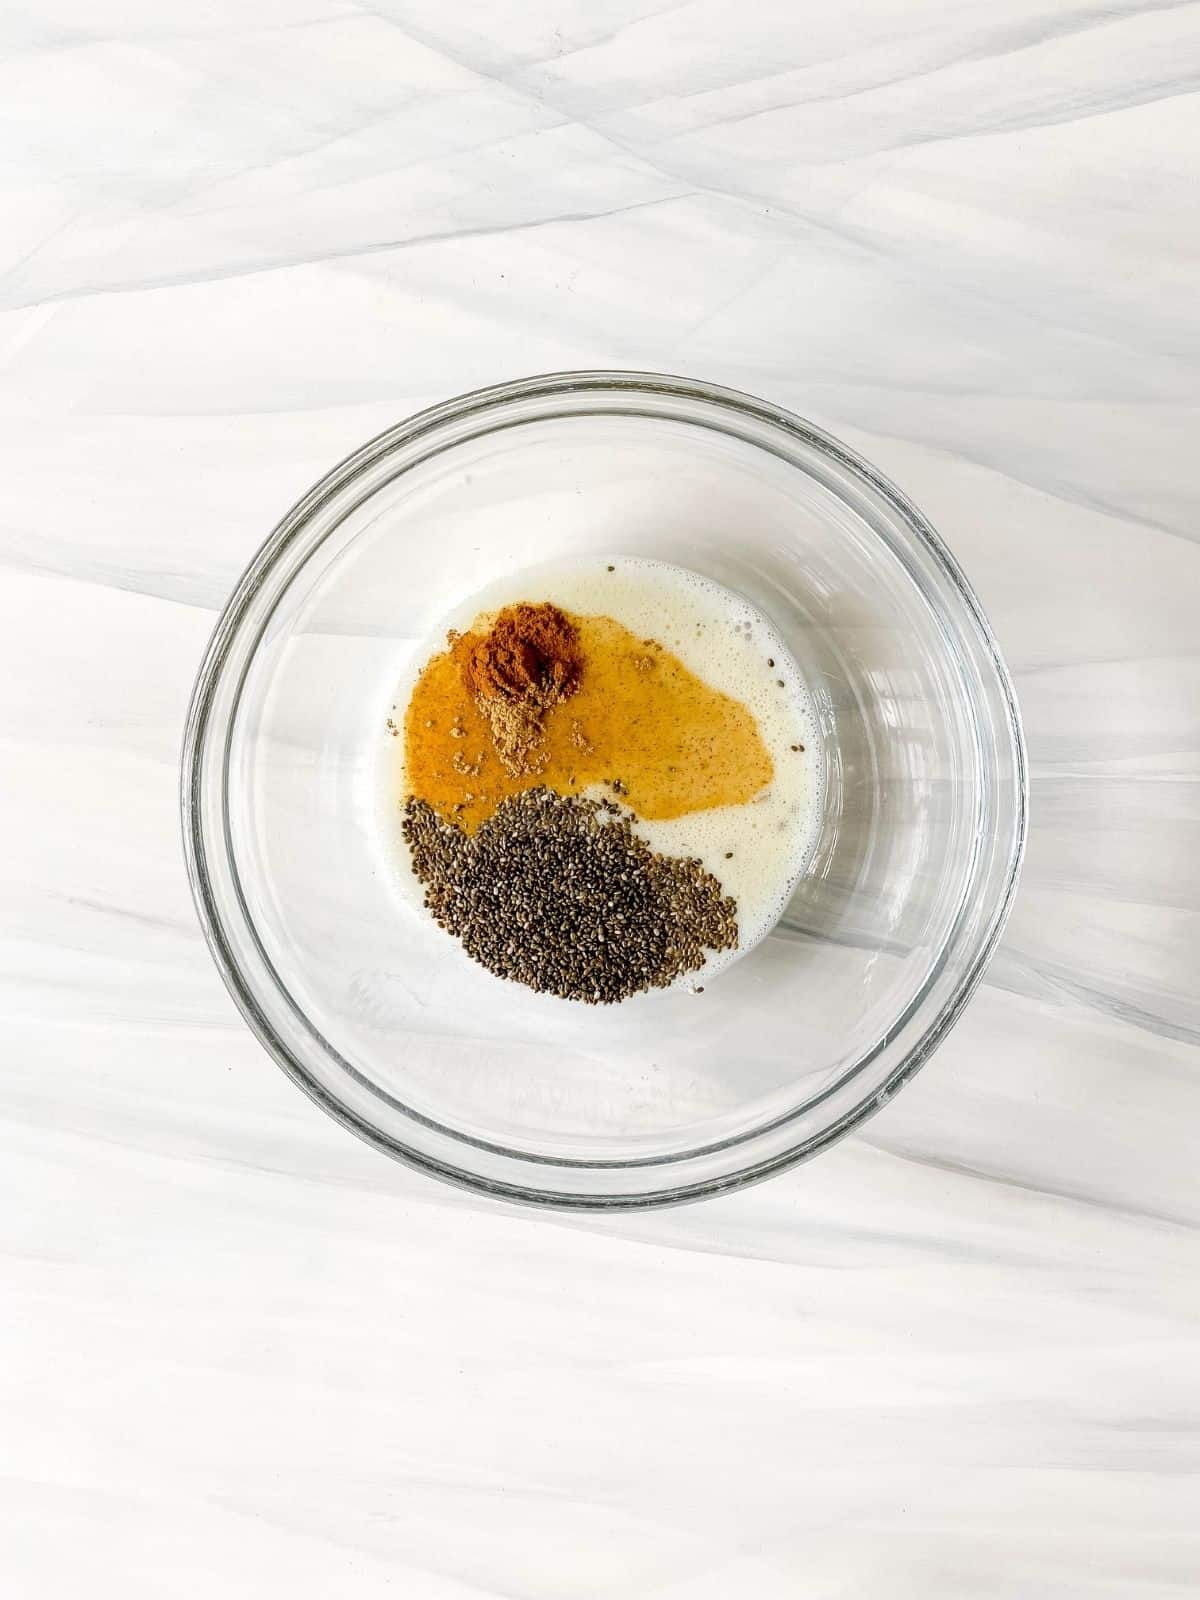 chia seeds, non-dairy milk and spices in a glass bowl.